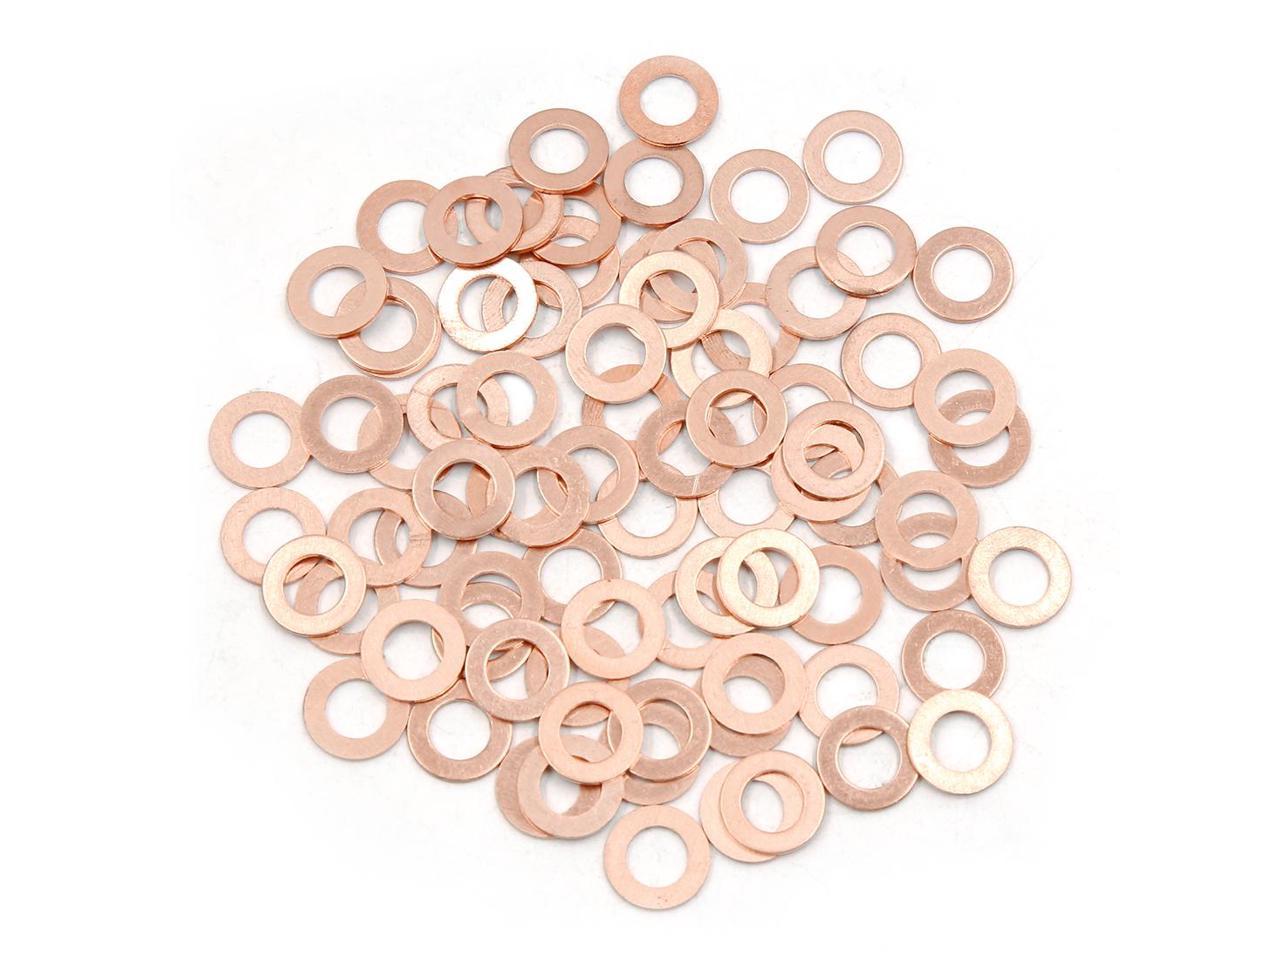 80pcs Solid Copper Washer Professional Sturdy High Quality Durable Gasket Washer 